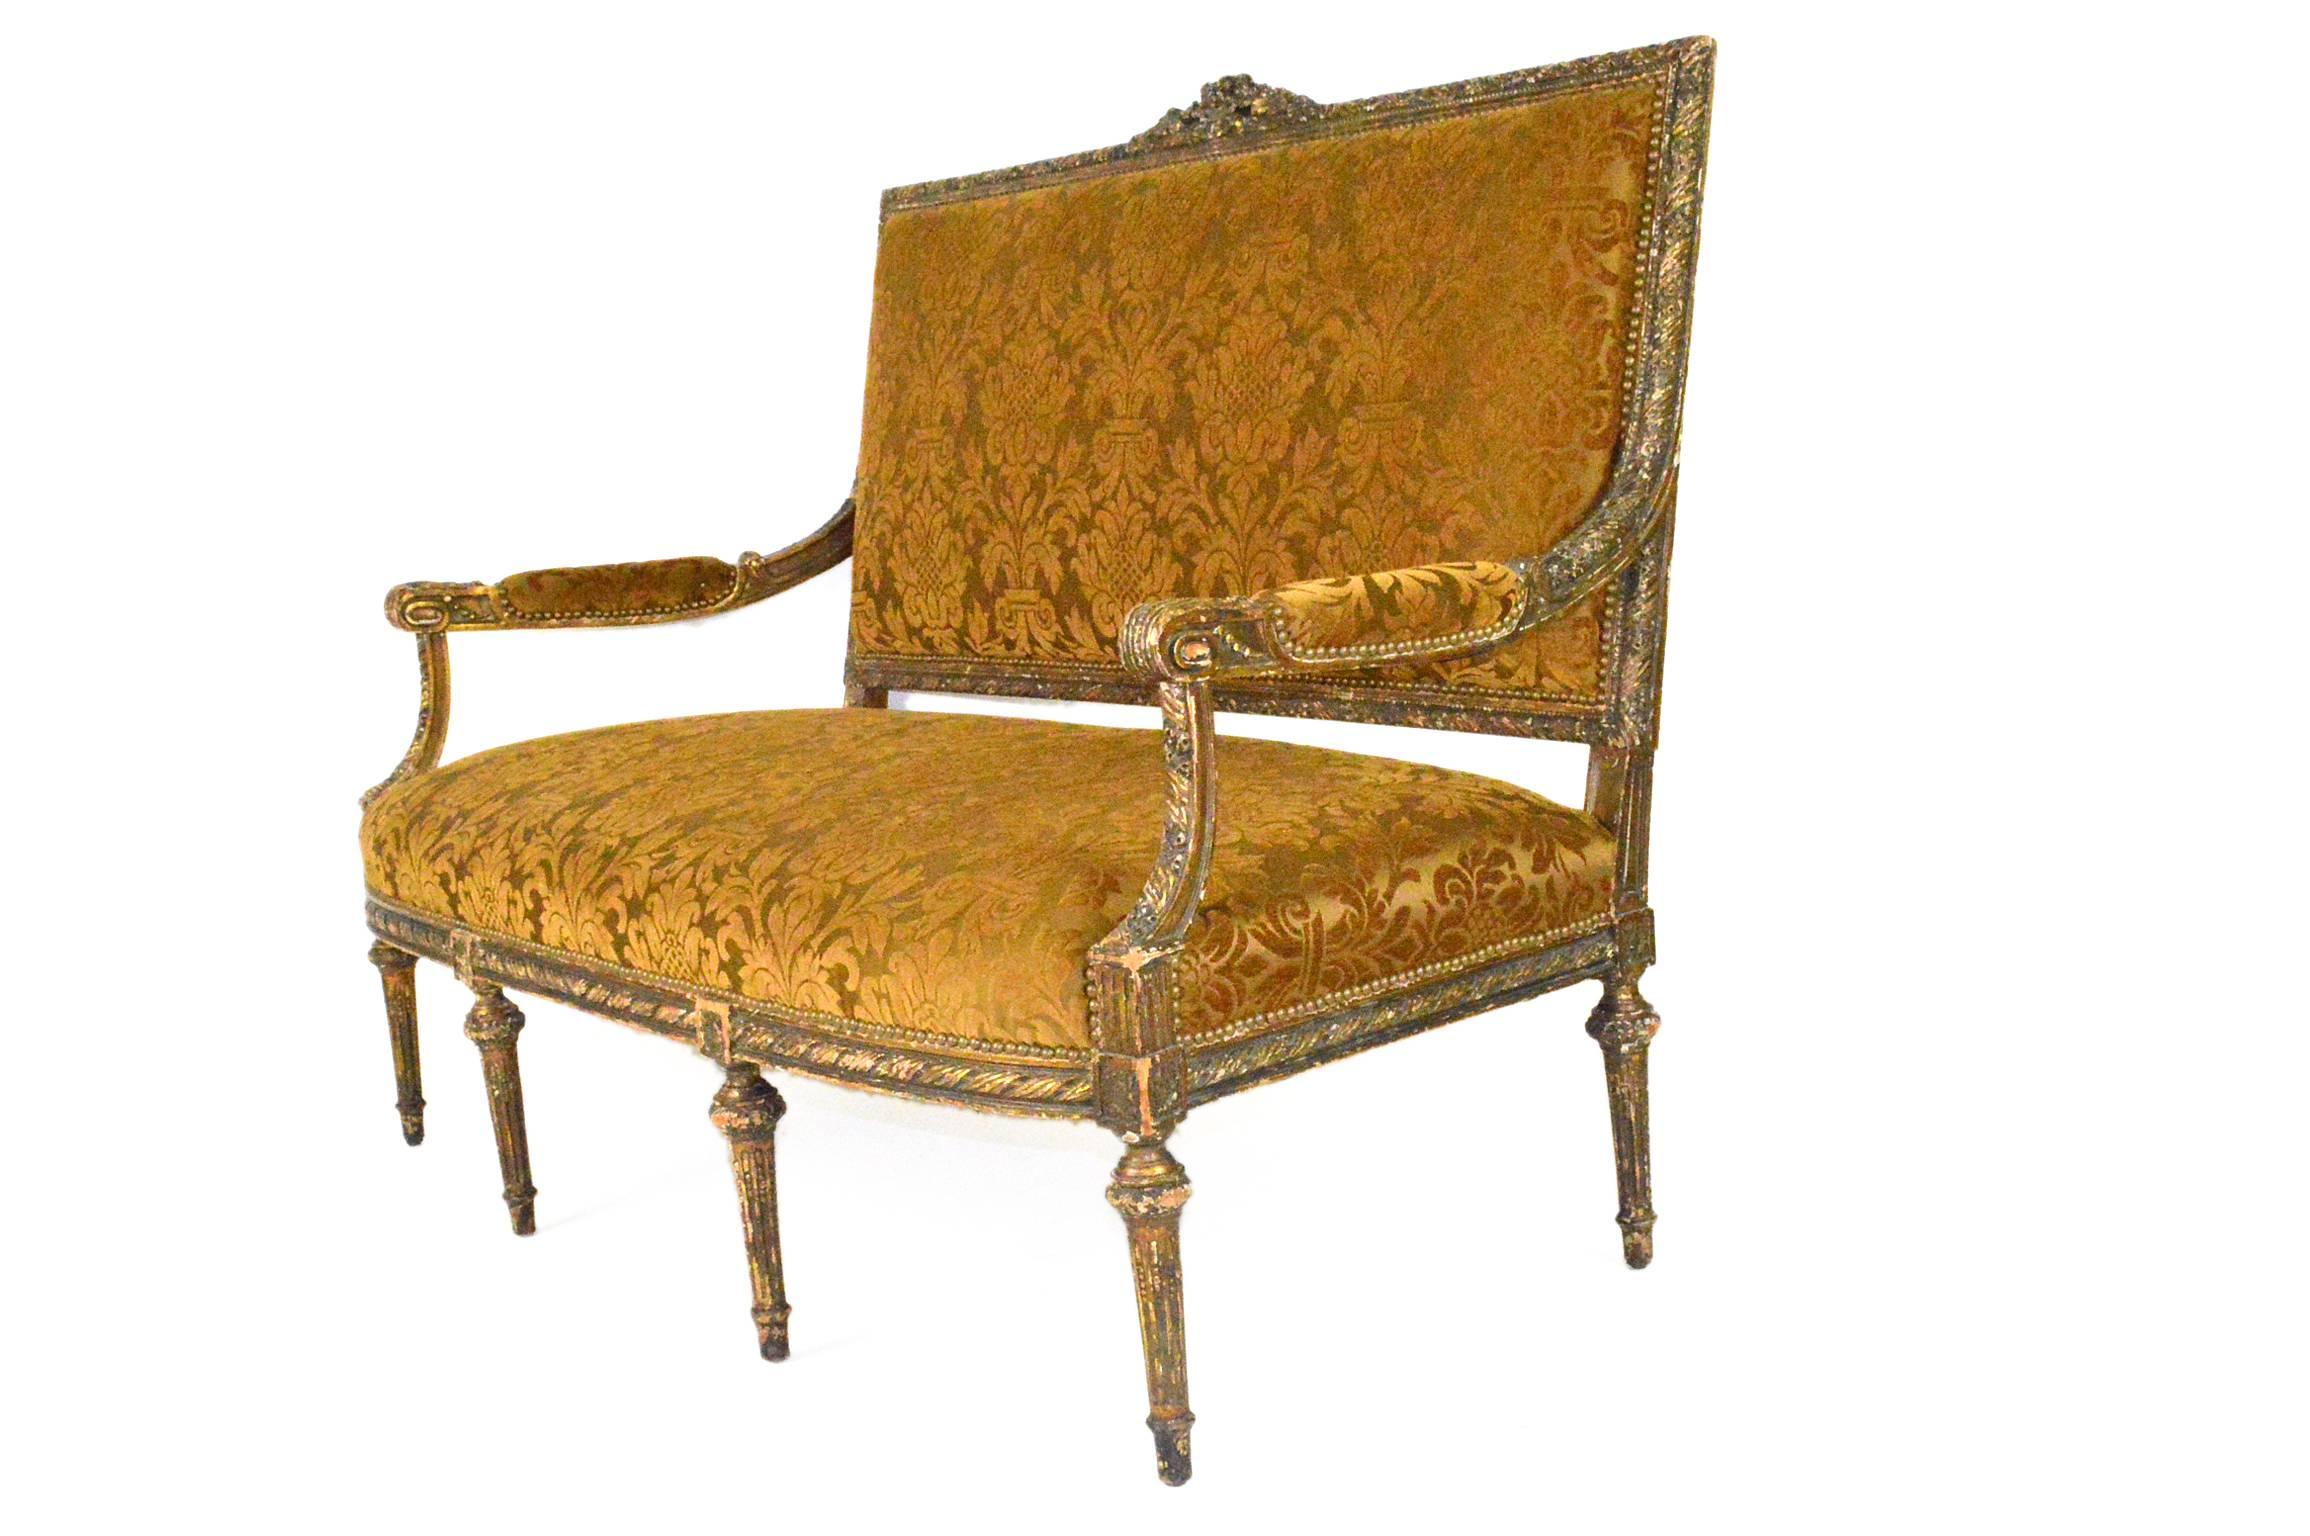 19th Century French Louis XVI Style Carved Painted Gilt Settee In Good Condition For Sale In Atlanta, GA